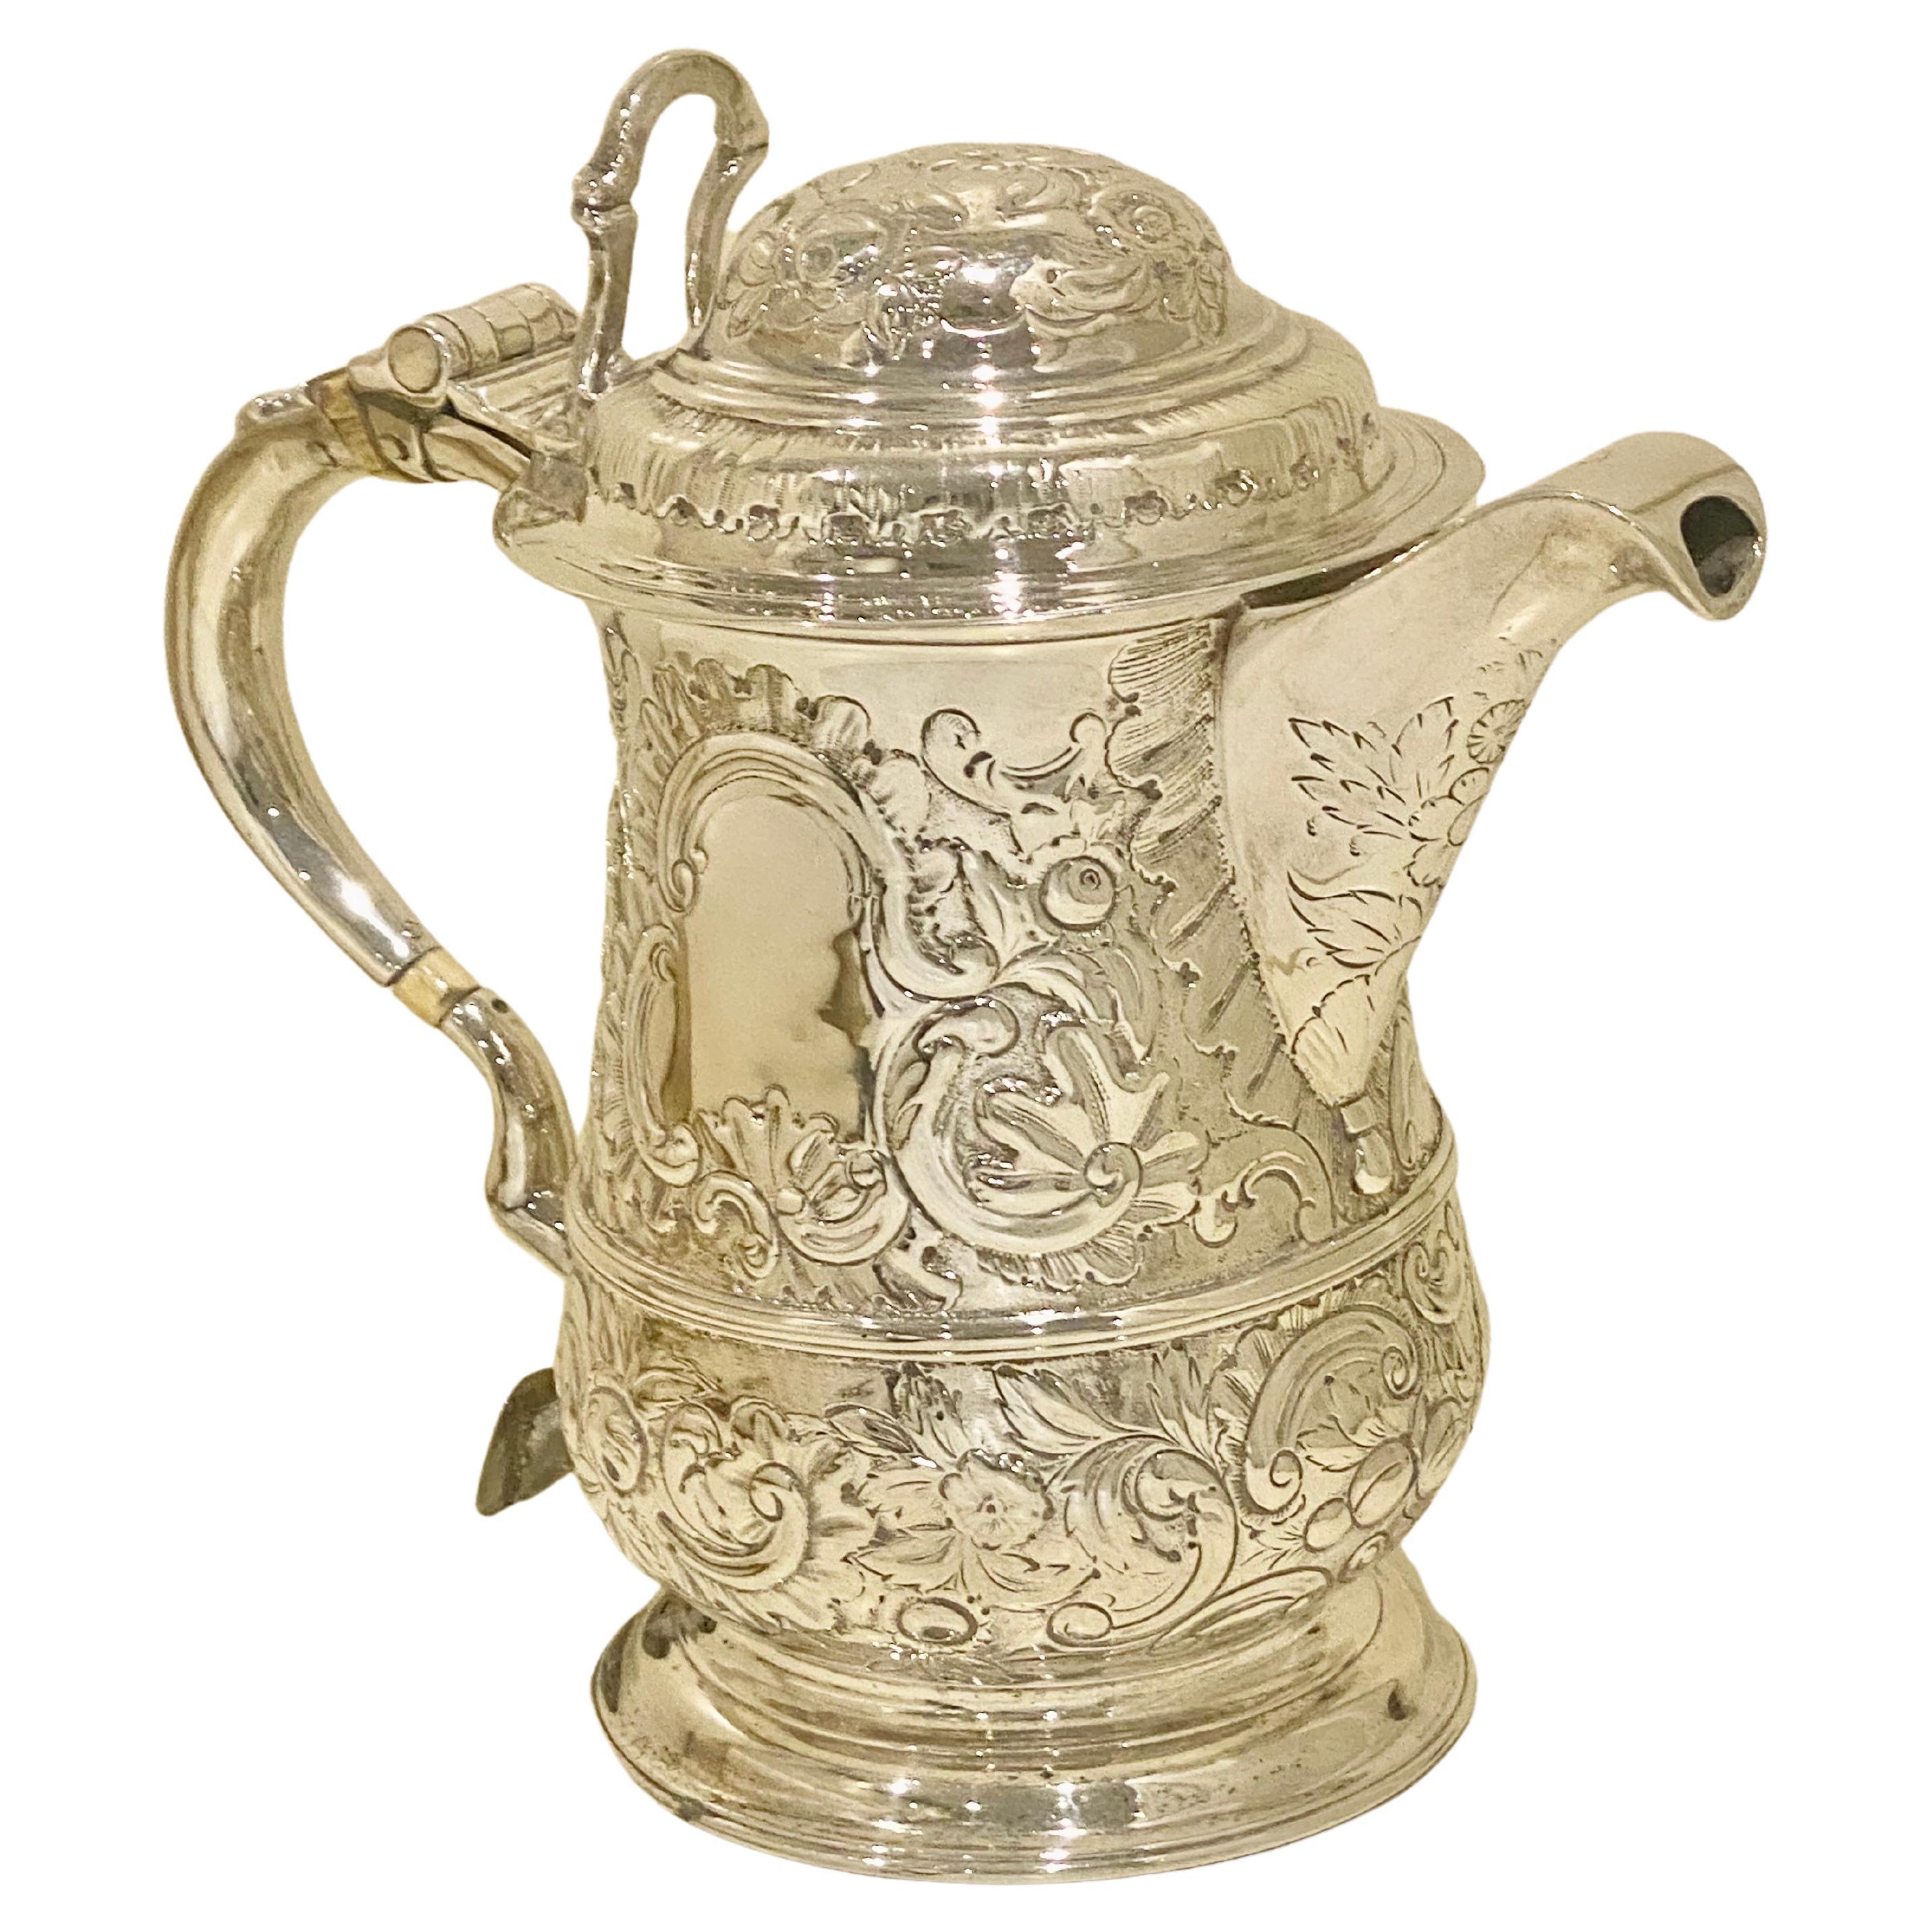 A fine quality chased silver Georgian quart tankard embellished with beautiful floral and shell motifs which is magnificently set on a matt background and highlighted with scallop surrounds. The hinged domed lid has a beautiful chair back